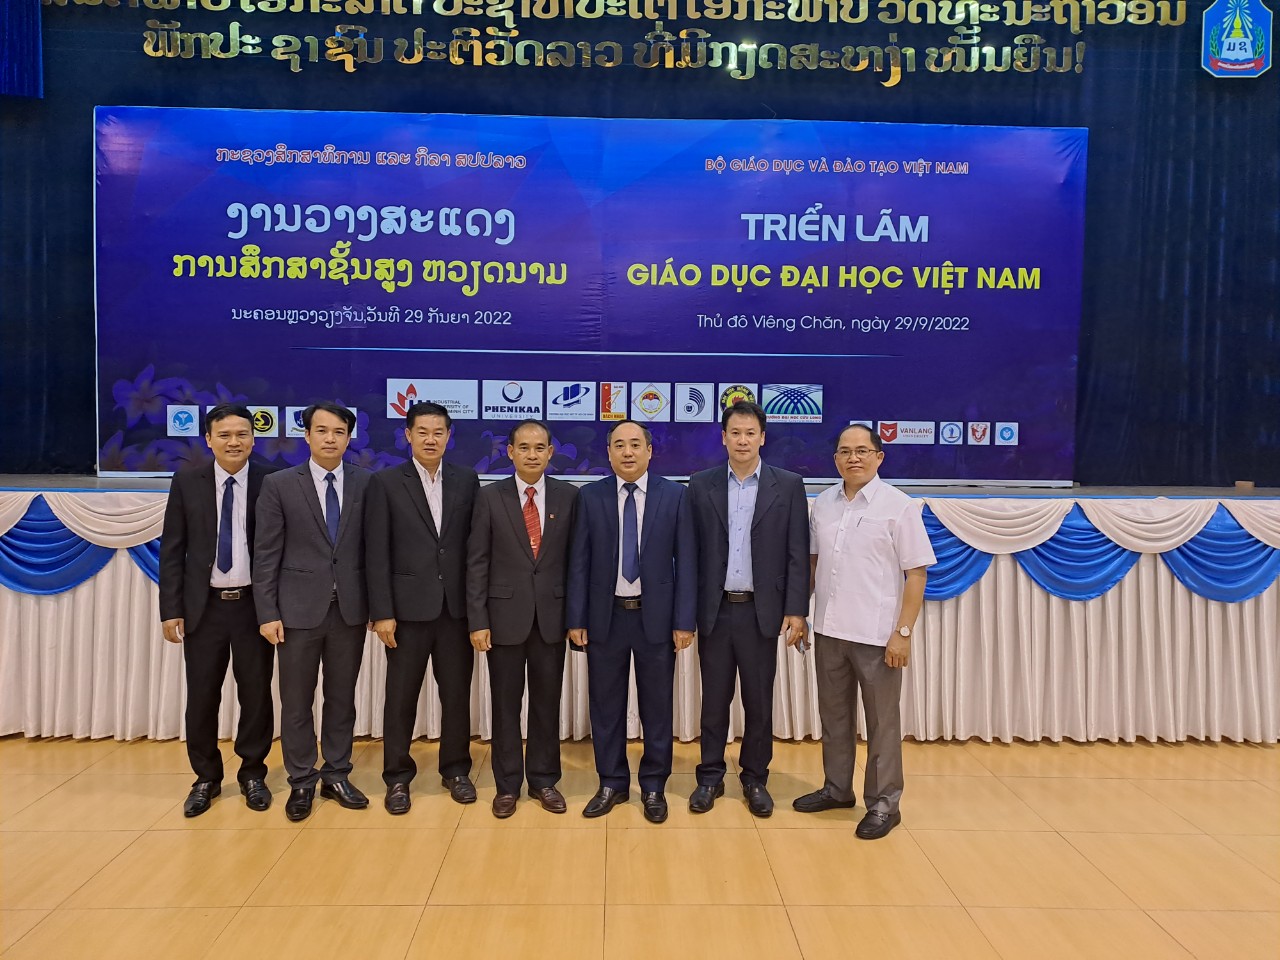 Hung Vuong University attended Viet Nam Graduate Education Exhibition in Laos and Forum improving training quality in education cooperation between Viet Nam and Laos